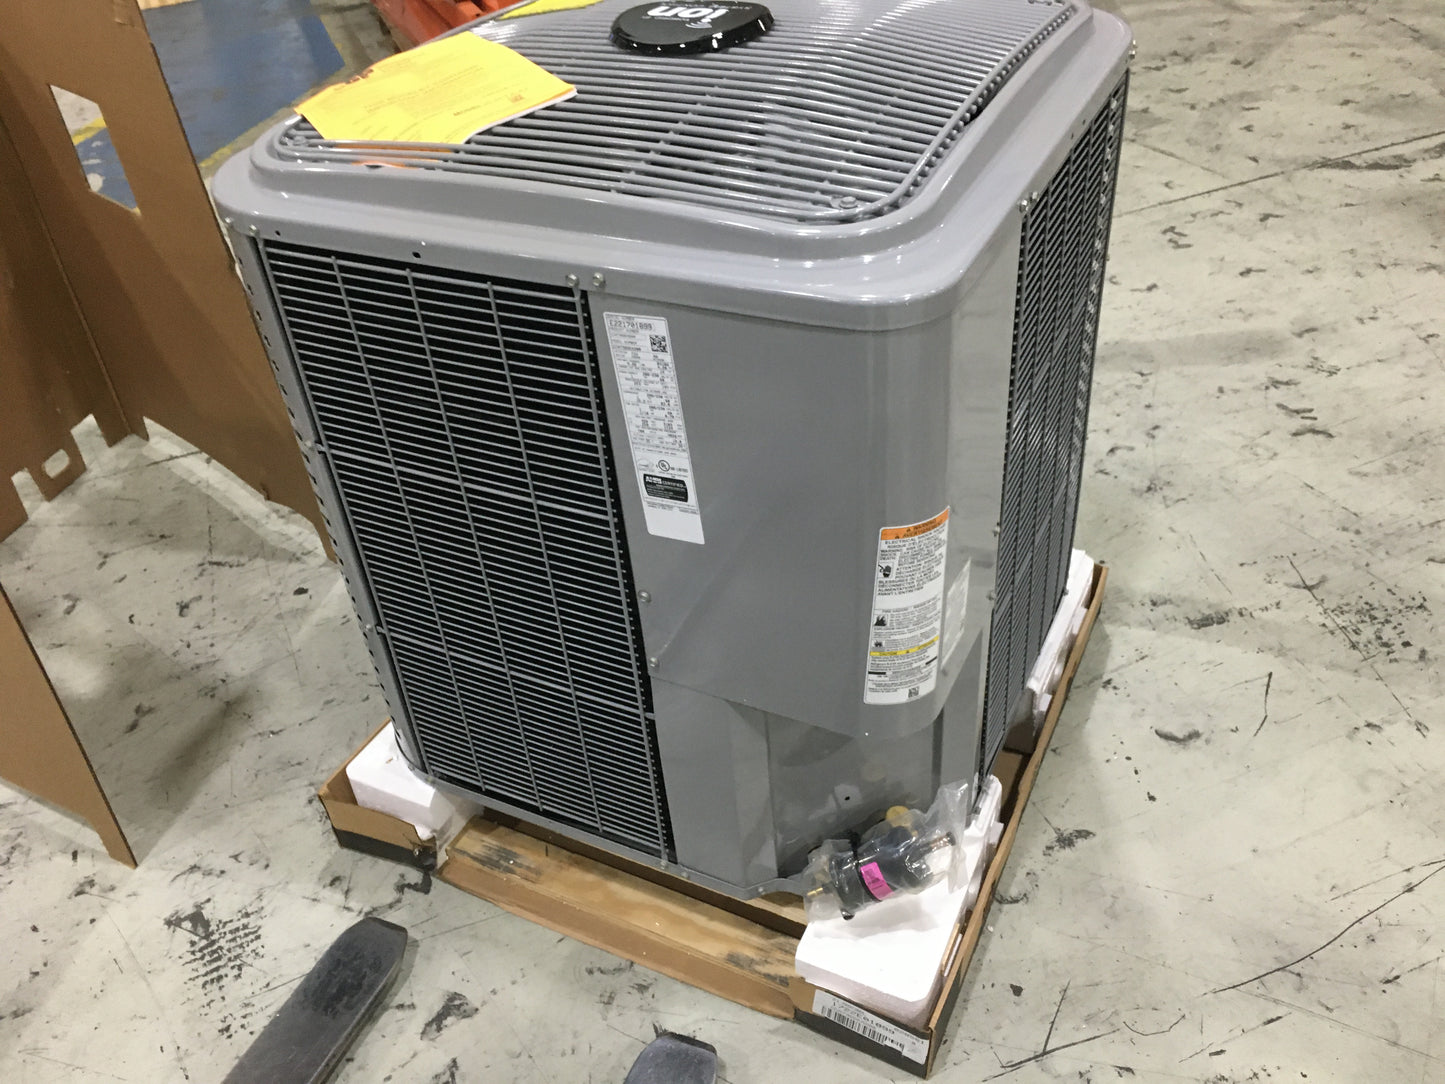 3 TON 2 STAGE COMMUNICATING COMPATIBLE AIR CONDITIONER WITH OBSERVER COMMUNICATING CONTROL SYSTEM; 208/230/60/1, 17 SEER, R-410A